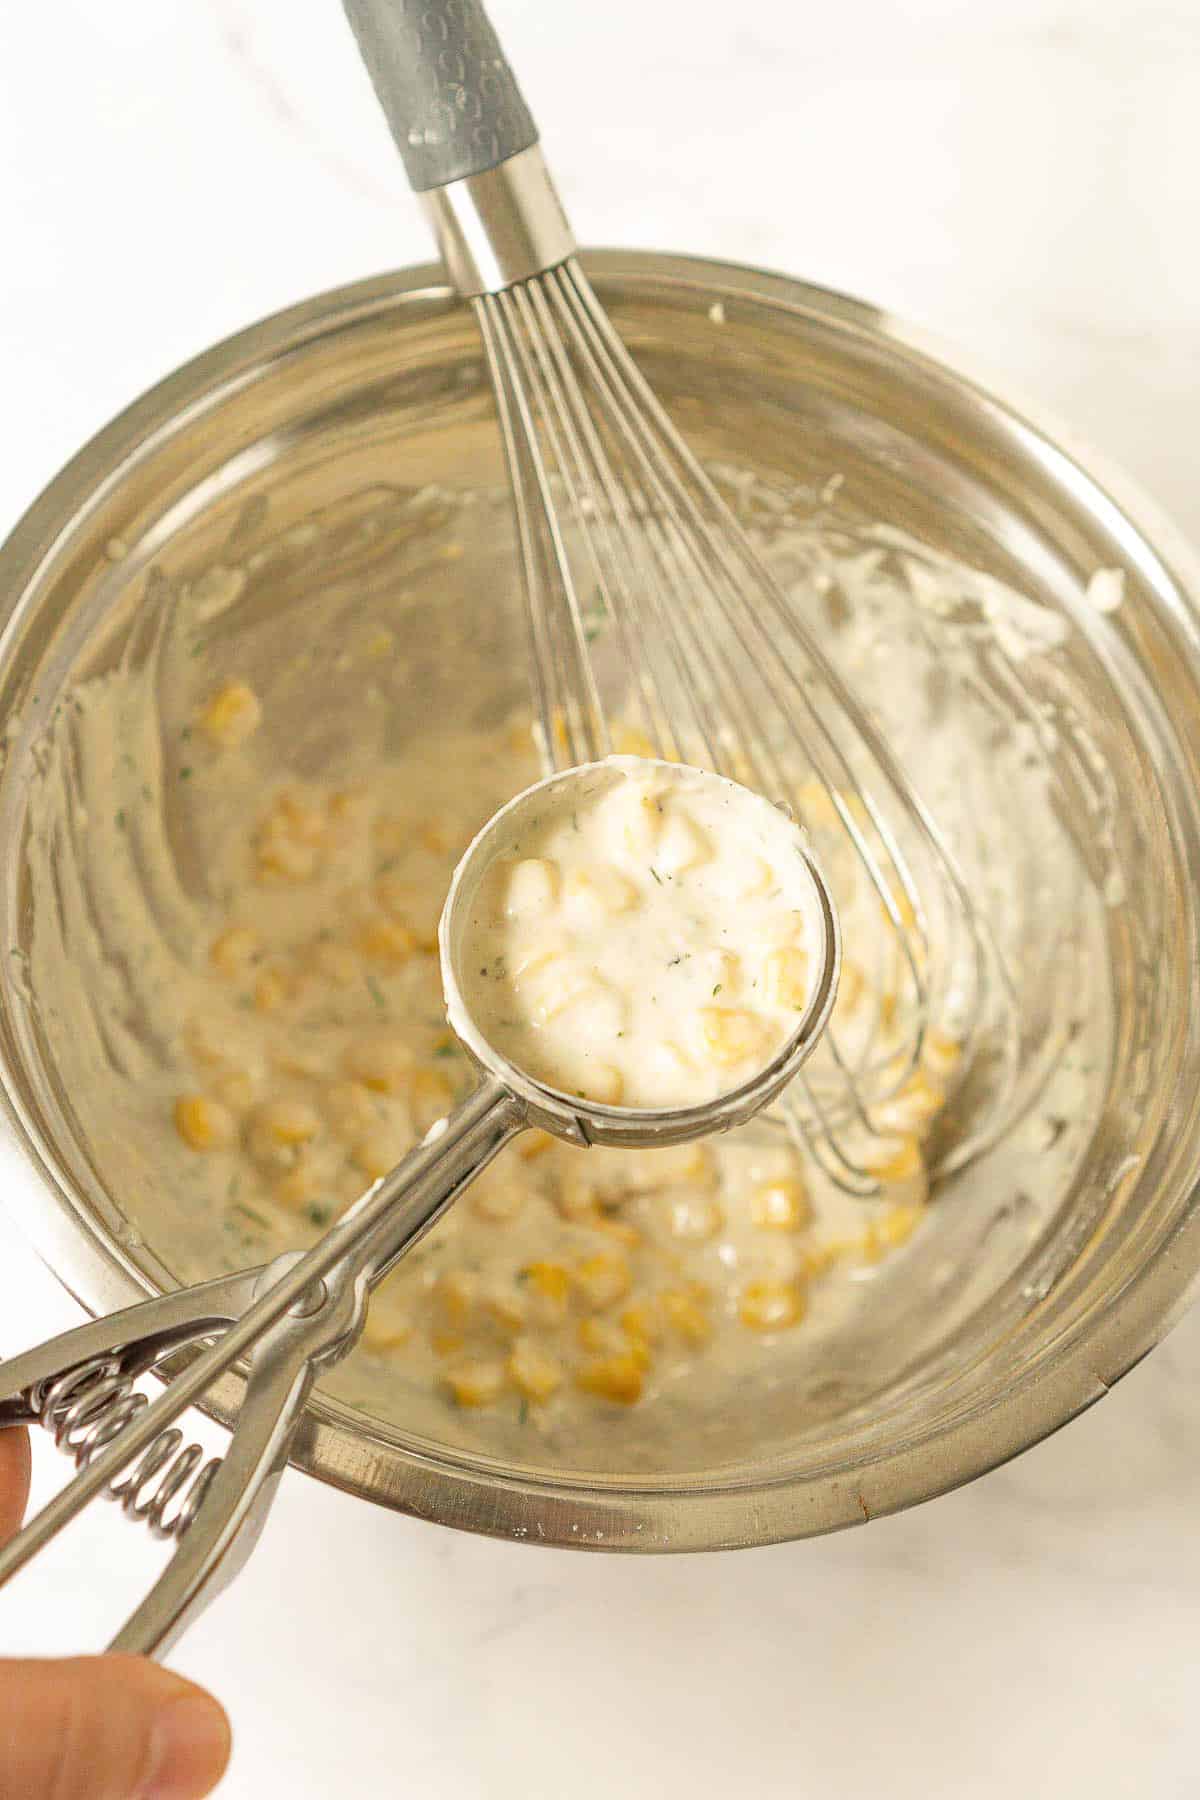 Corn fritter batter in an ice cream scoop